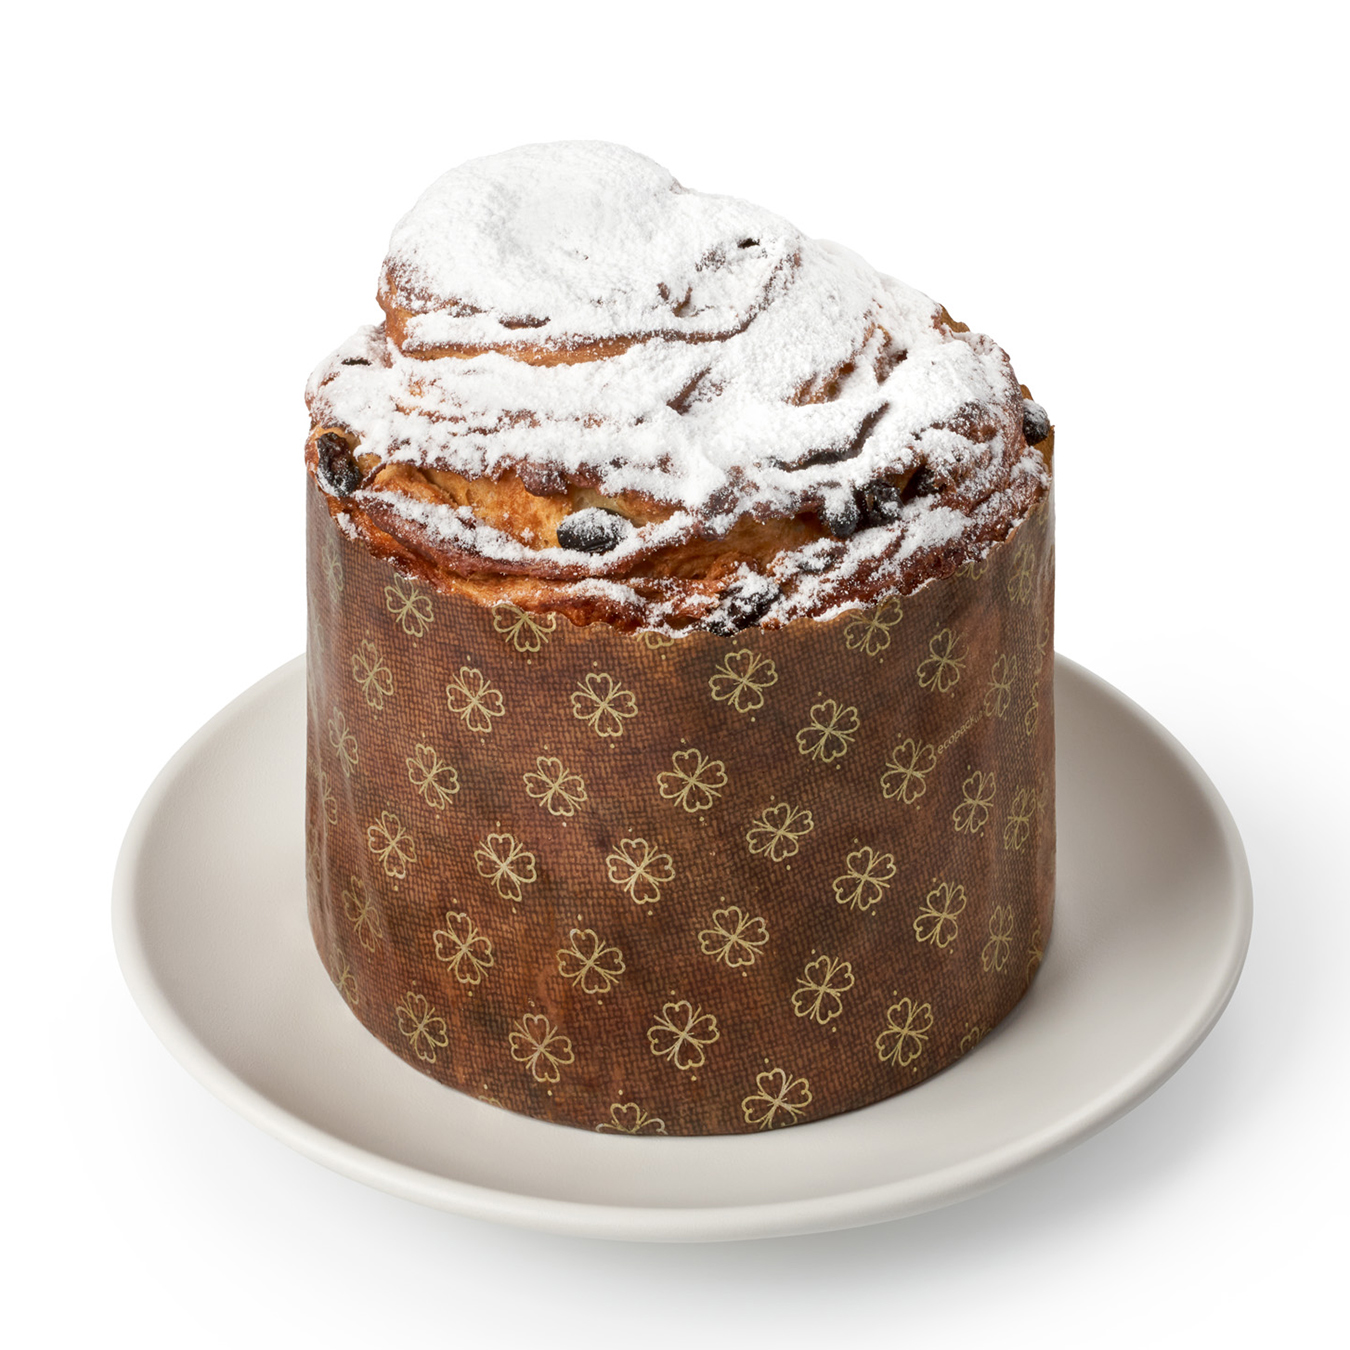 Cruffin on butter 500g